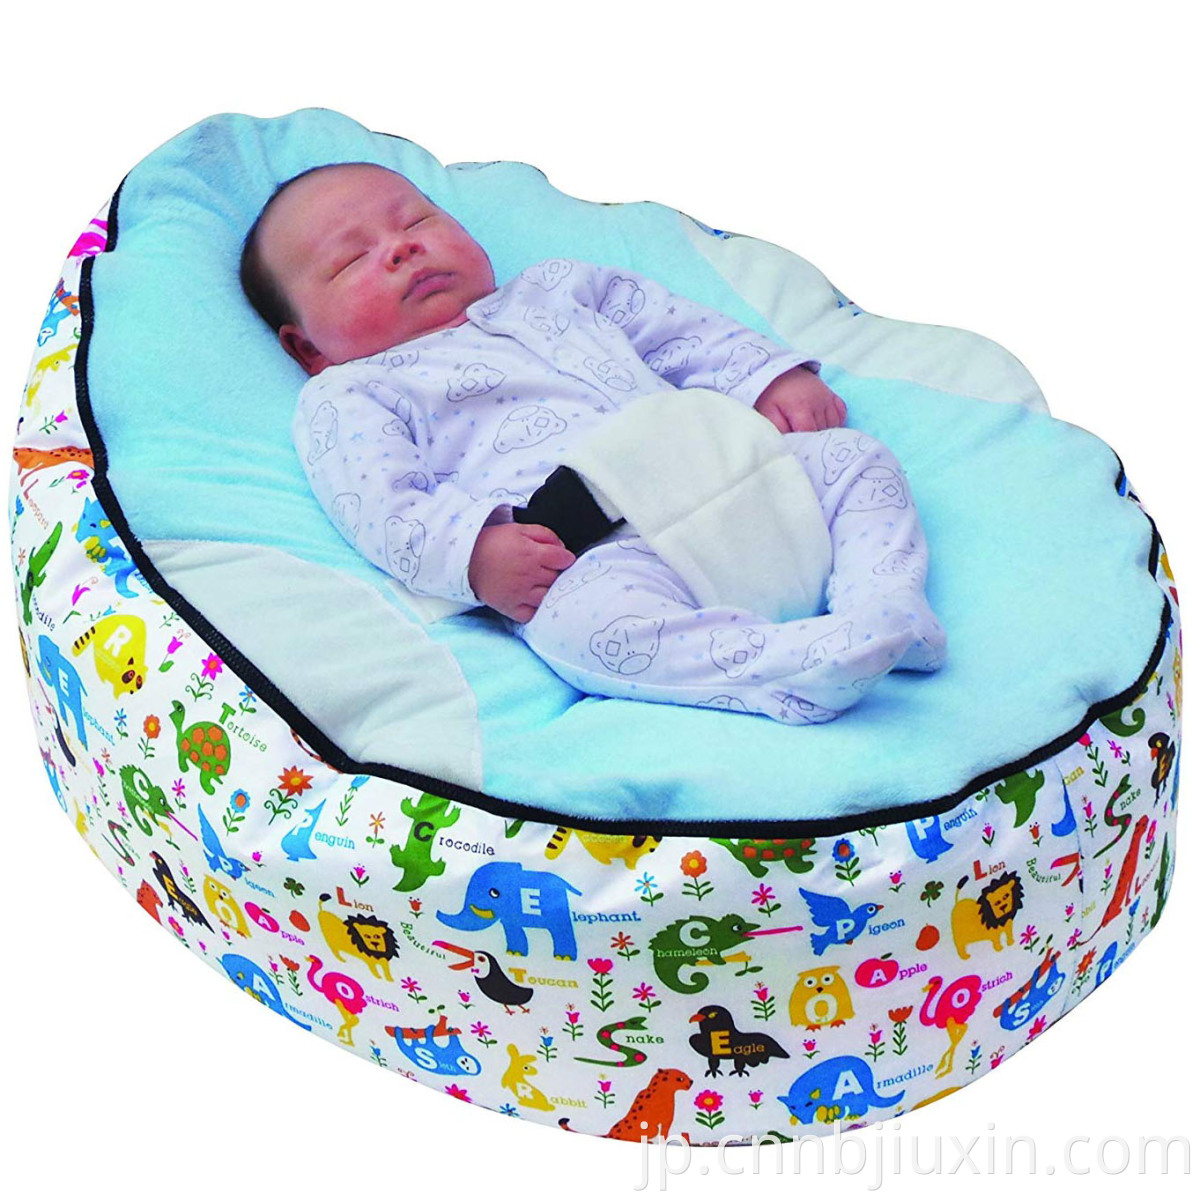 Baby Doll Carry Bed sofa